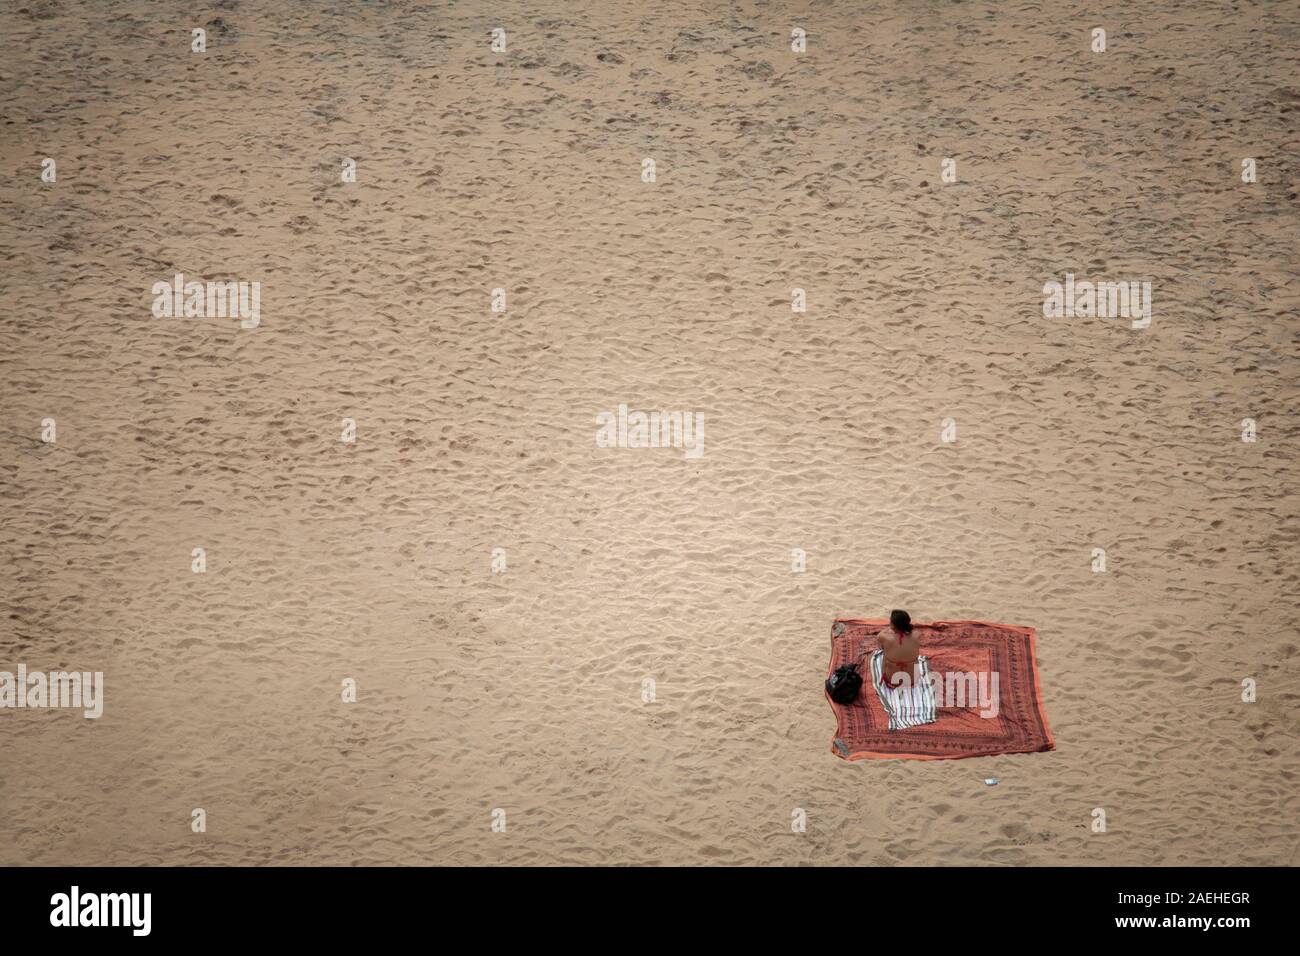 lonely woman sitting on sandy beach Stock Photo